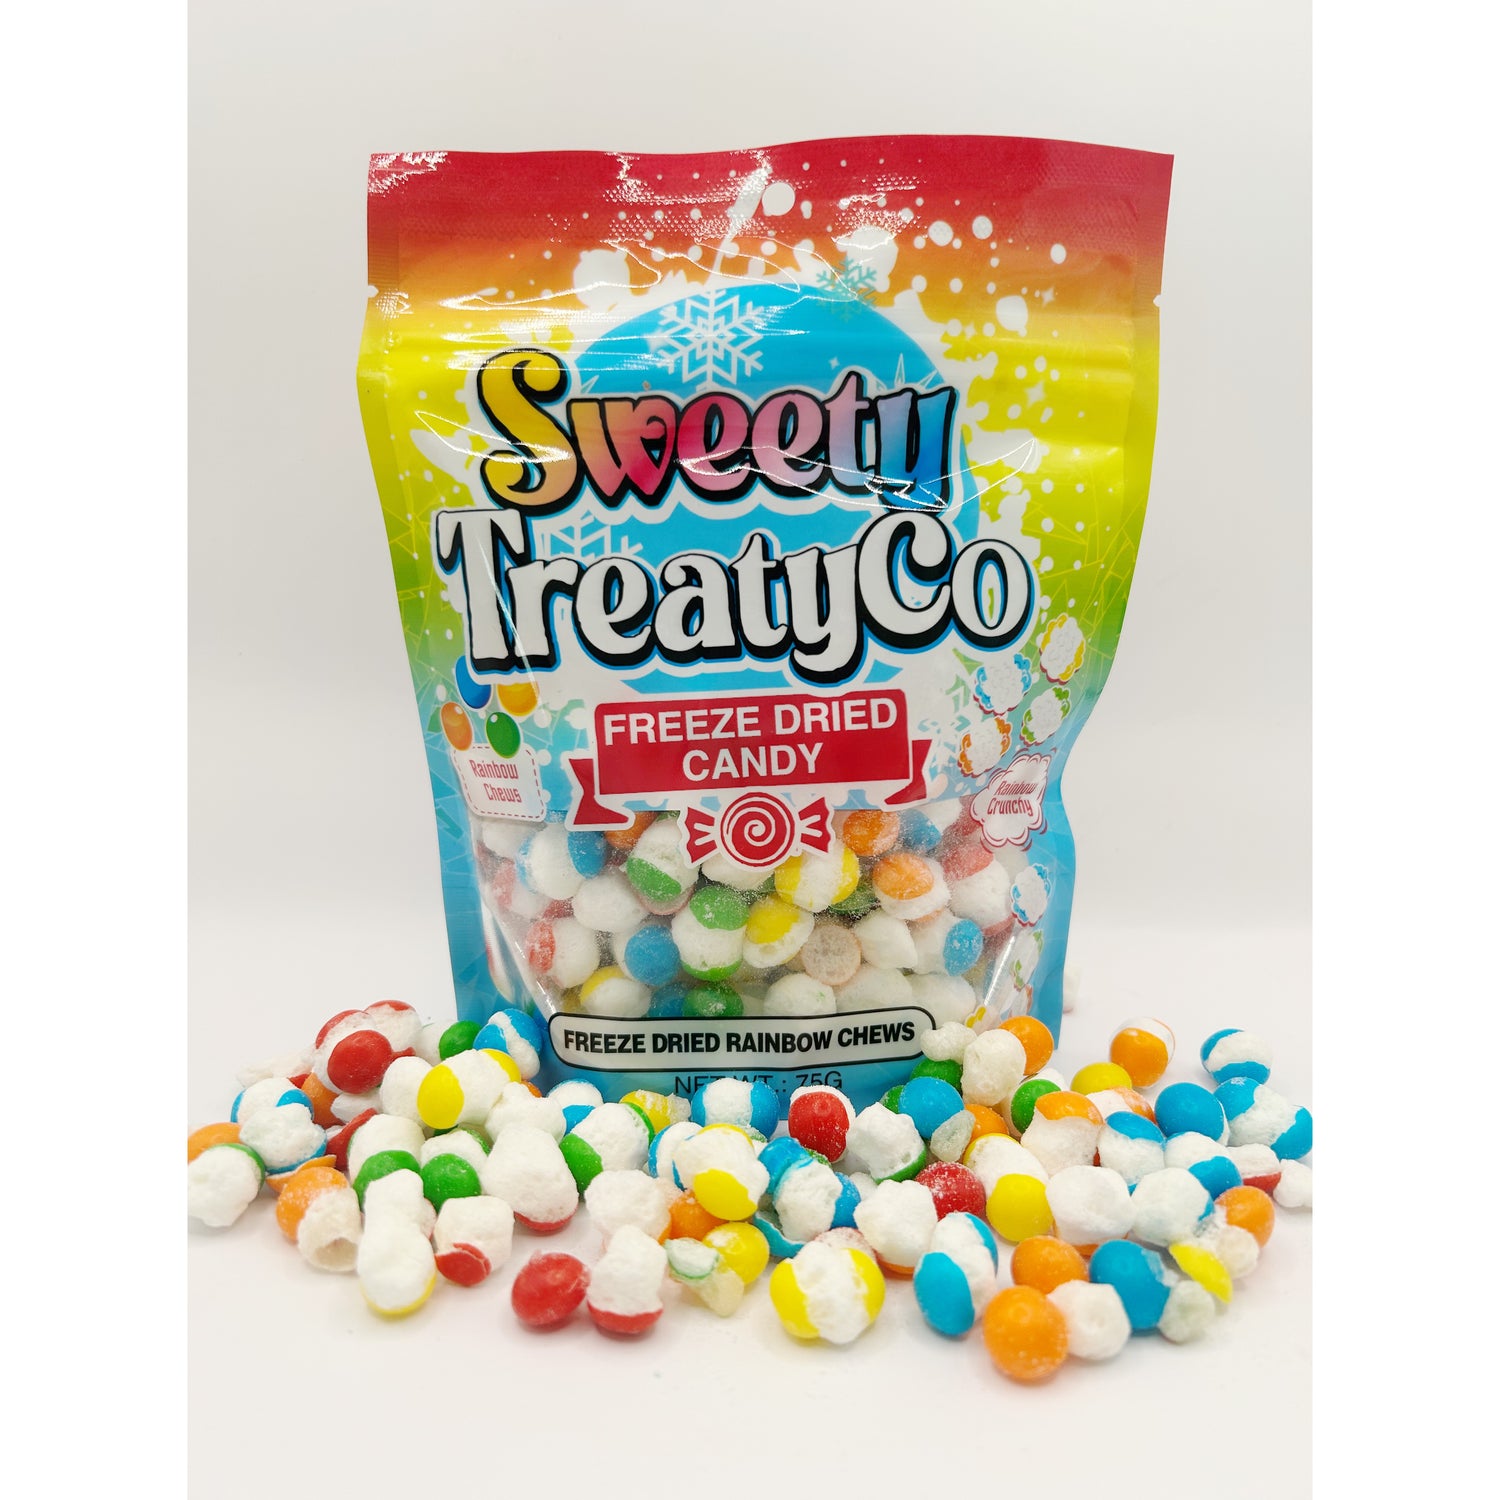 A colorful package of SweetyTreatyCo Freeze Dried Candy with snowflake designs, surrounded by multicolored freeze-dried candies scattered in the foreground on a white surface.